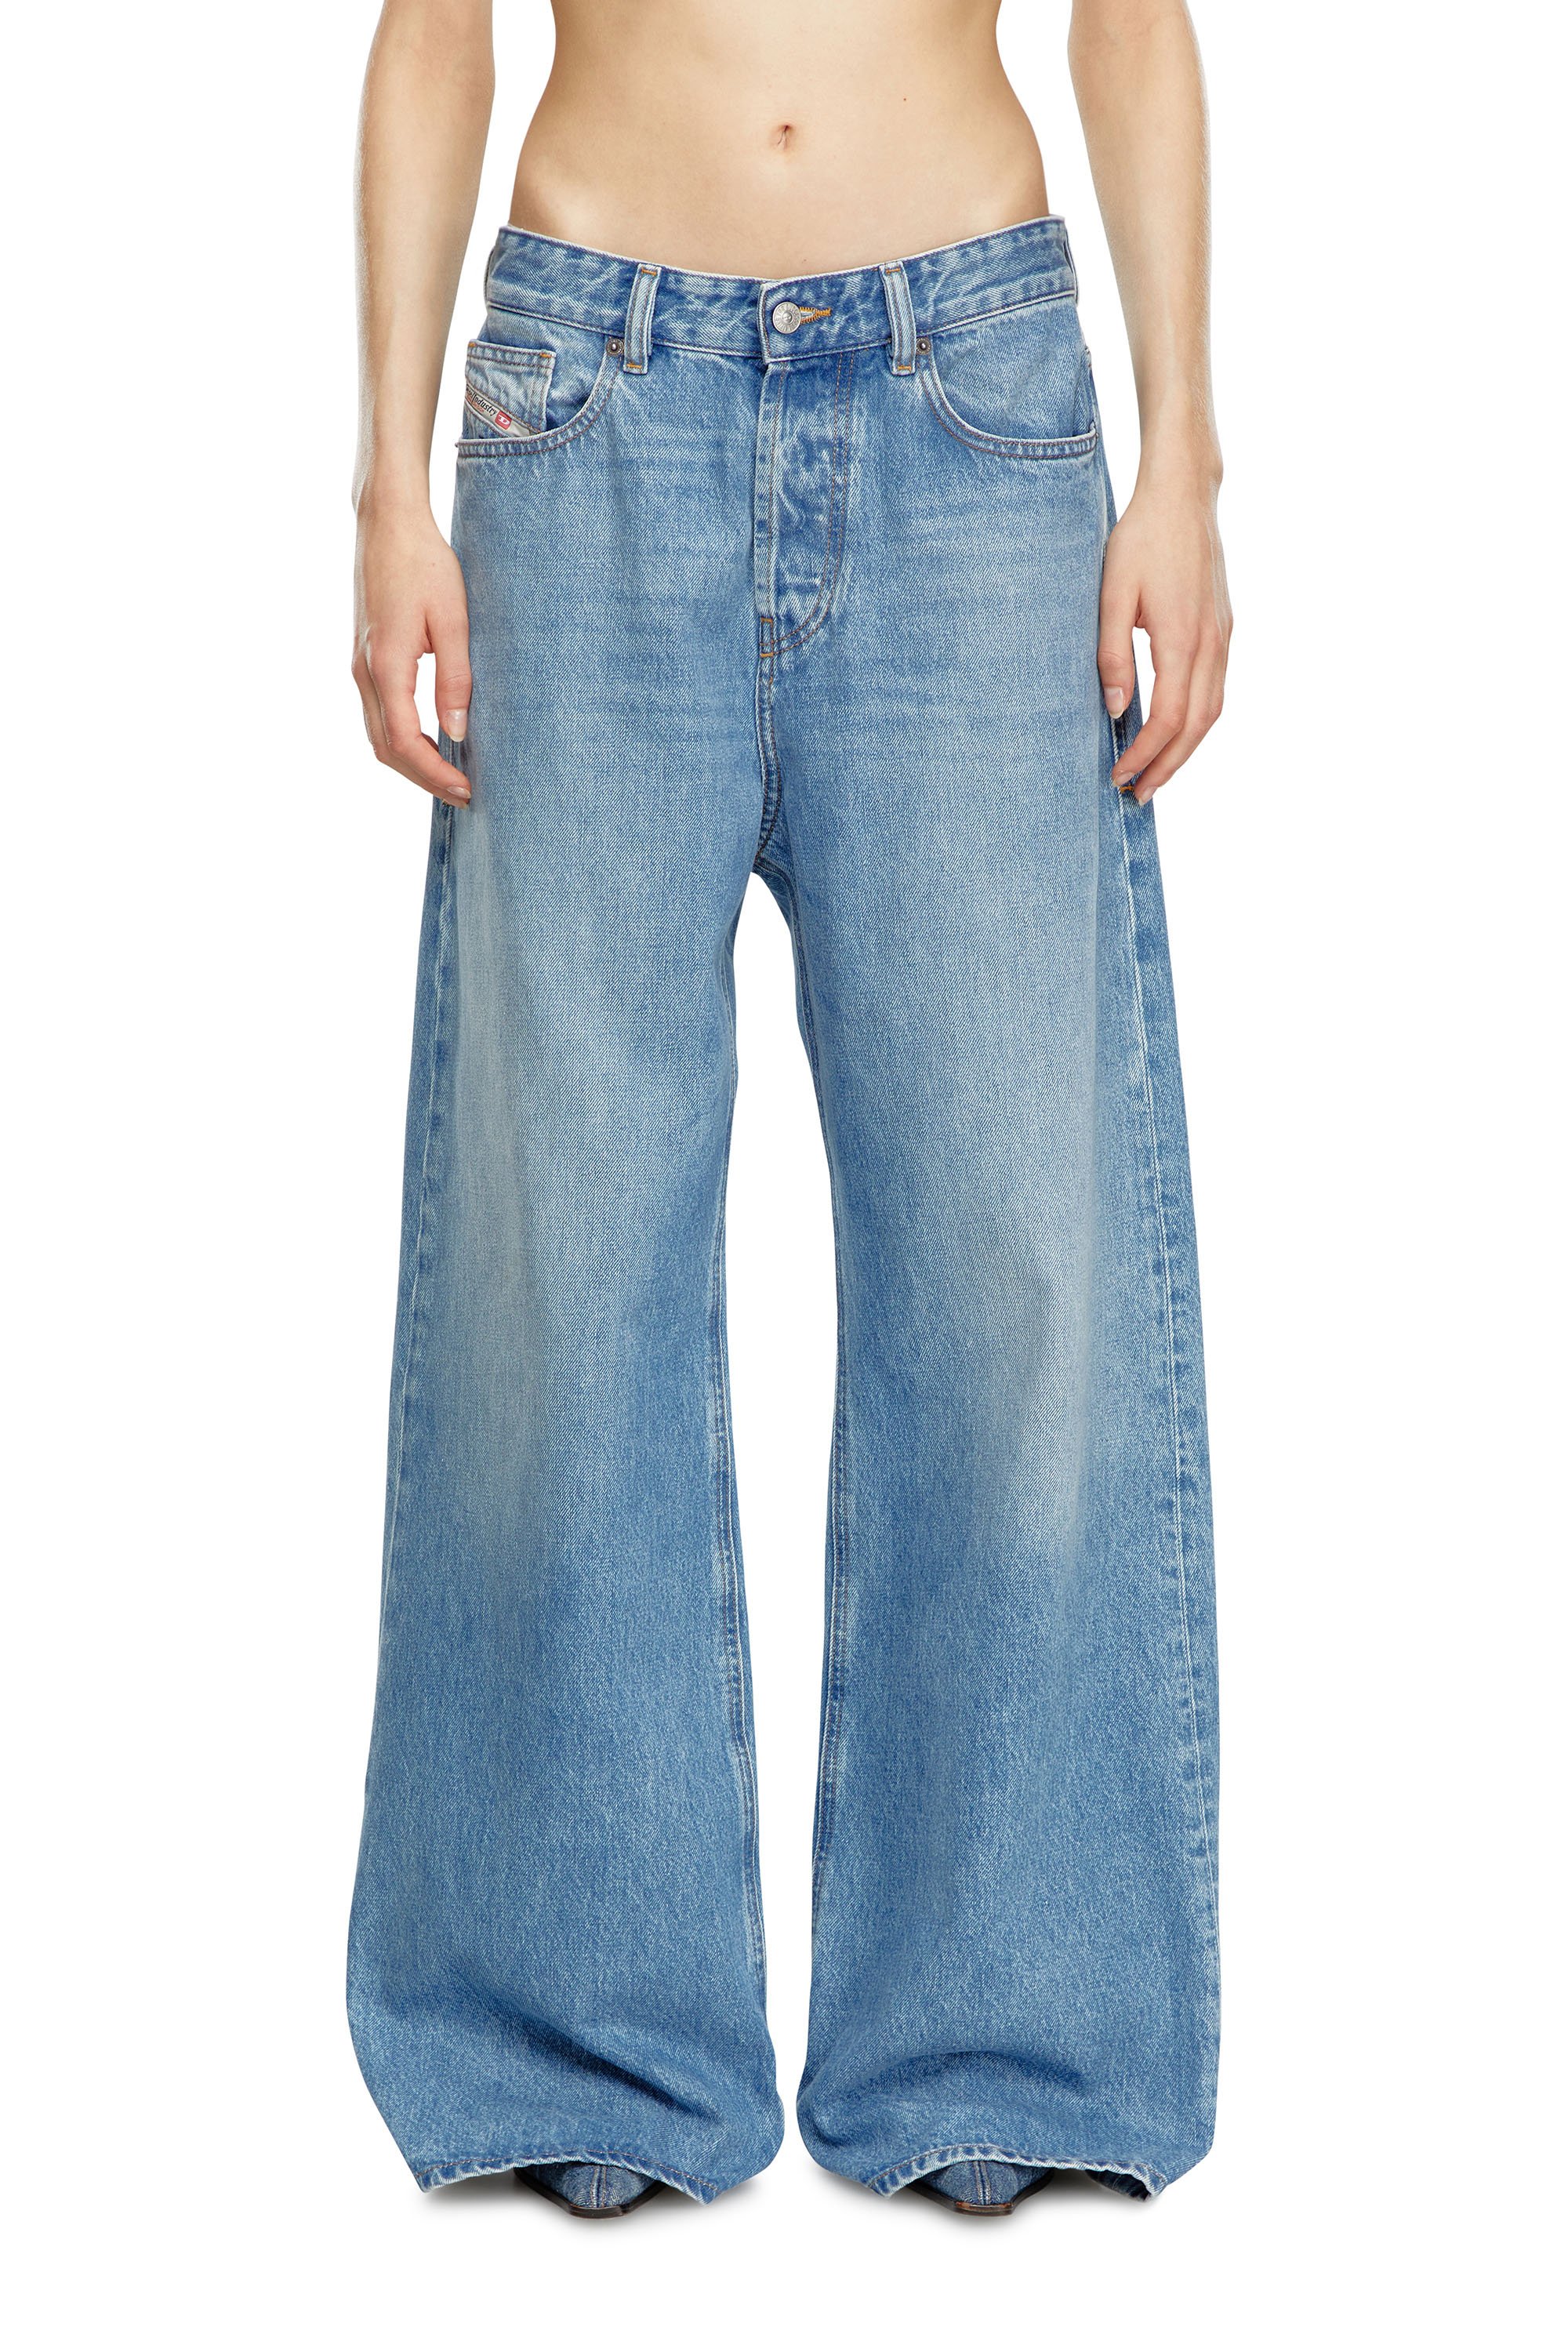 Diesel - Straight Jeans 1996 D-Sire 09I29, Mujer Straight Jeans - 1996 D-Sire in Azul marino - Image 2